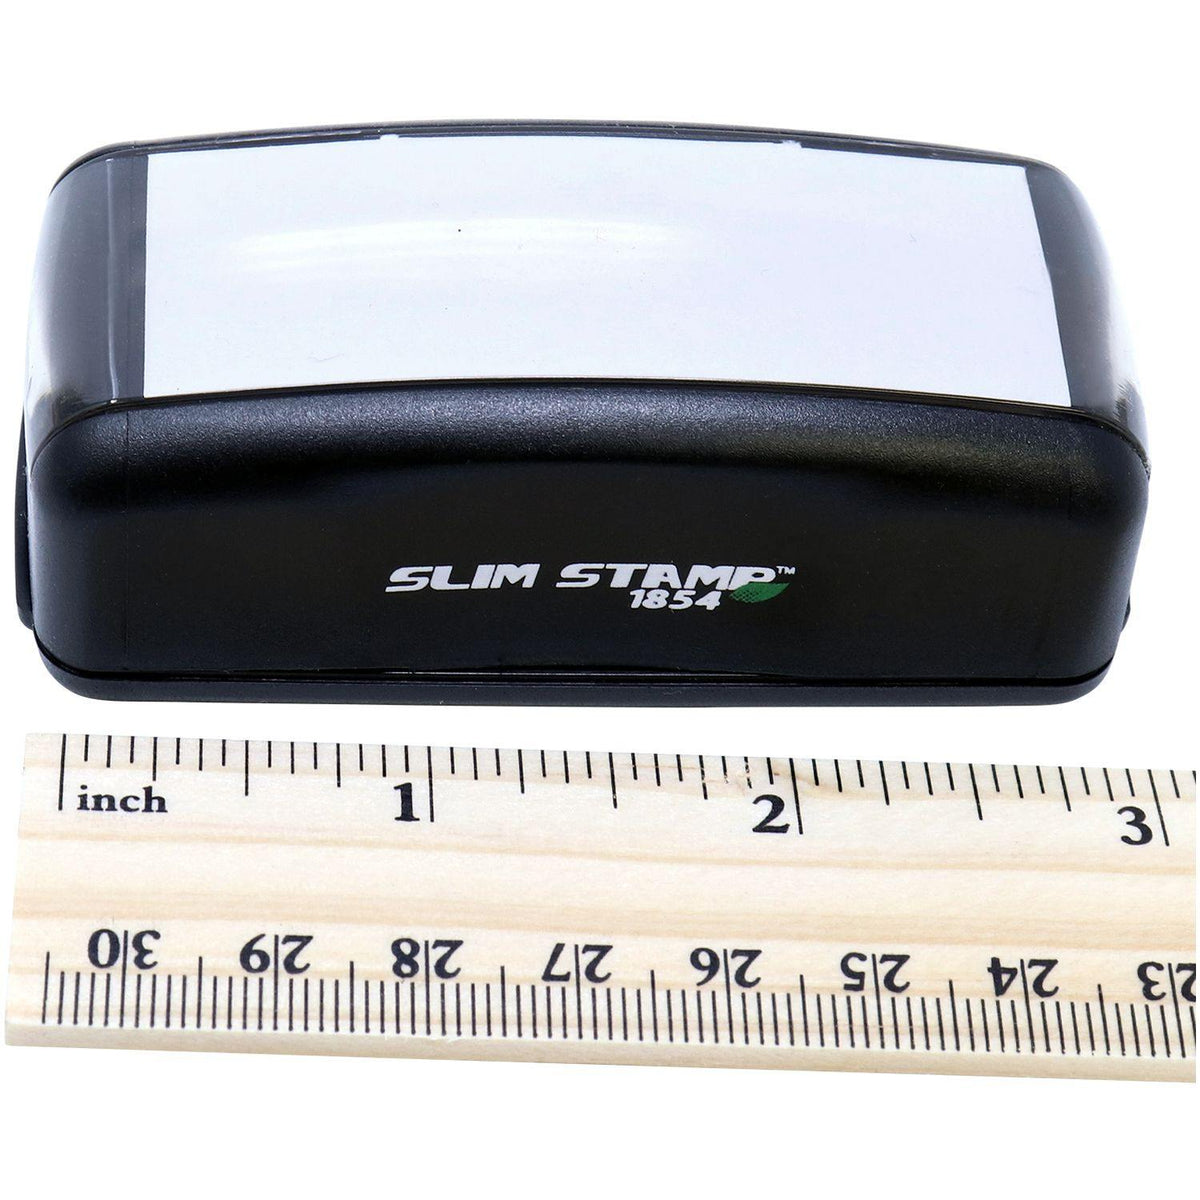 Measurement Large Pre-Inked Unclassified Stamp with Ruler